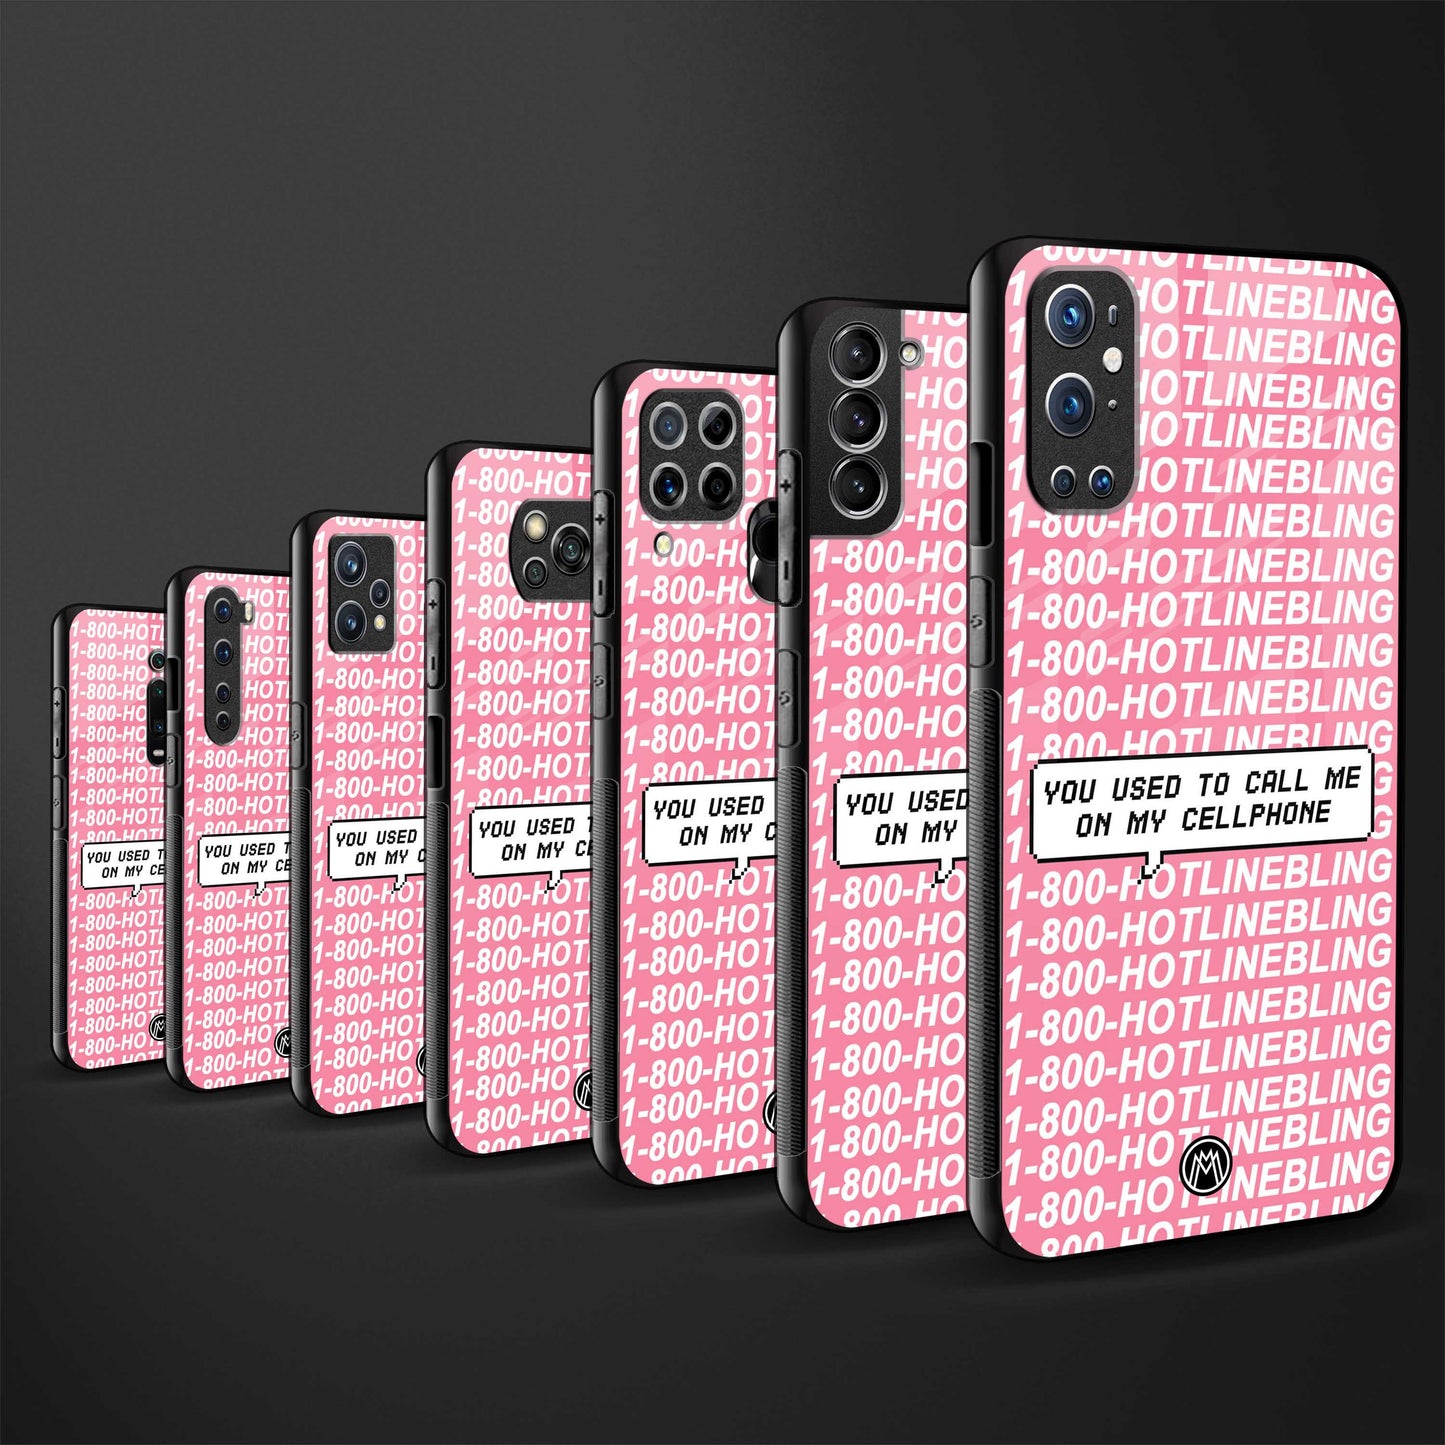 1800 hotline bling phone cover for iphone x 